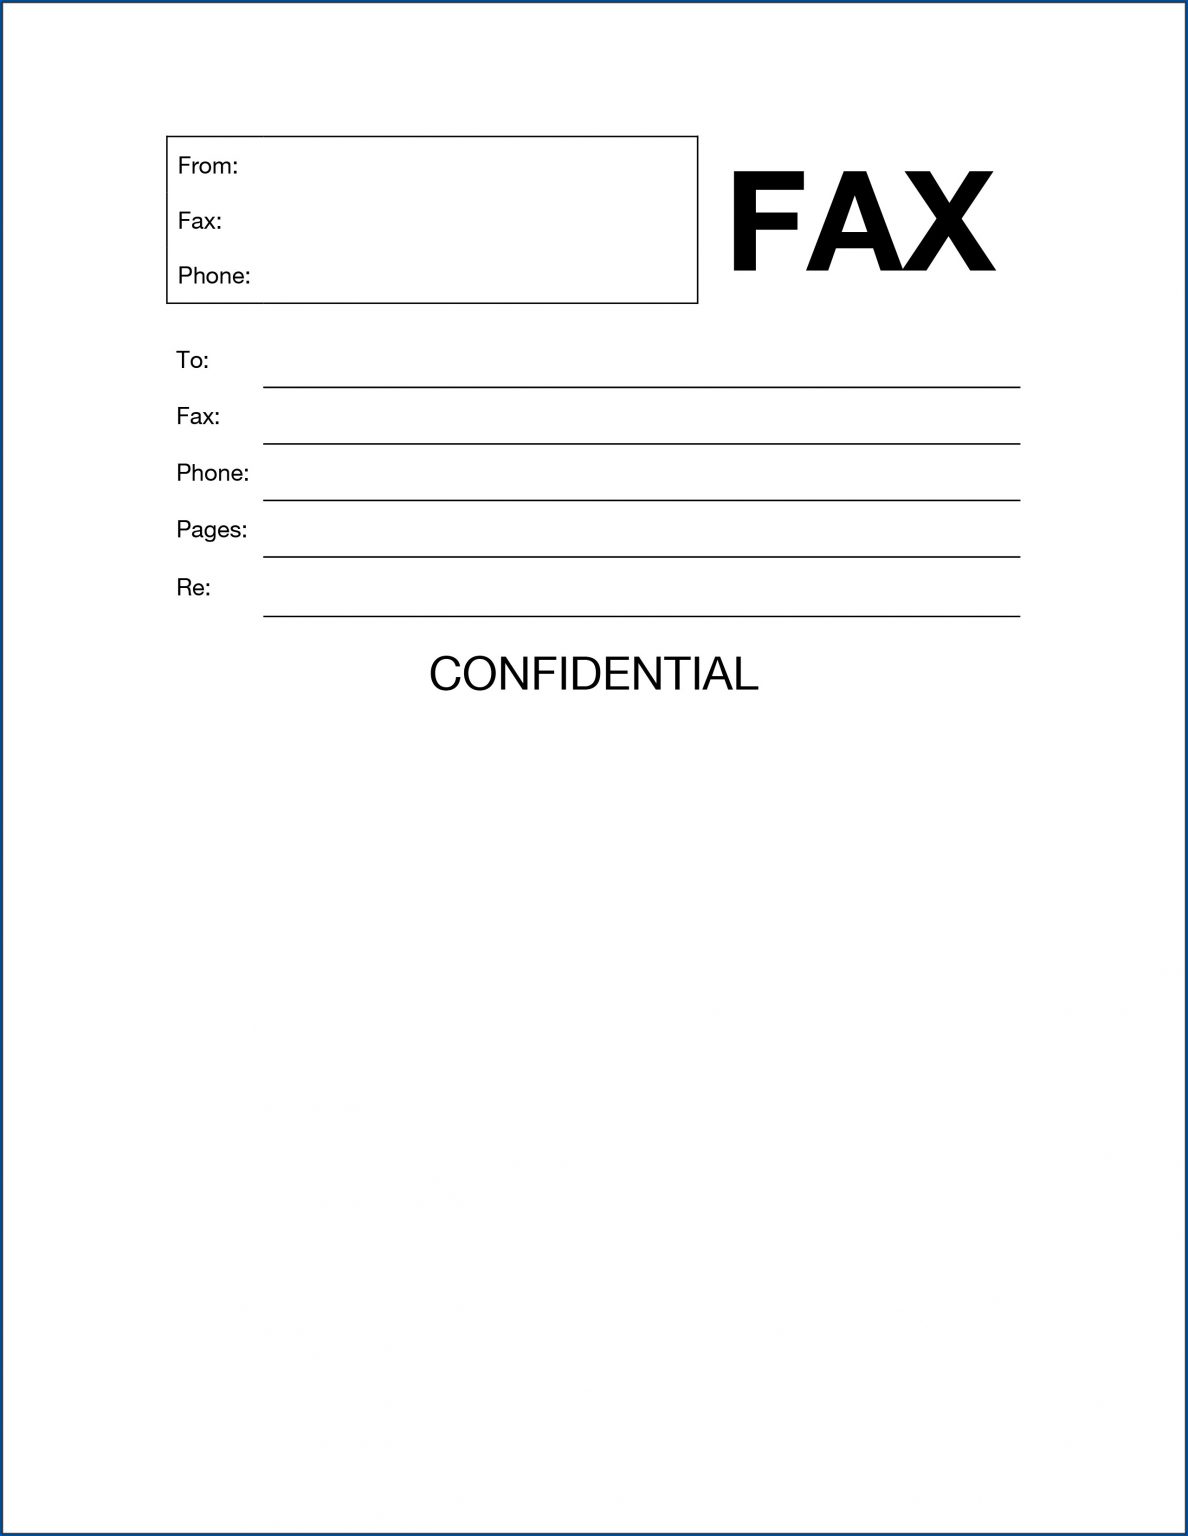  Free Printable Fax Cover Sheet Word Template